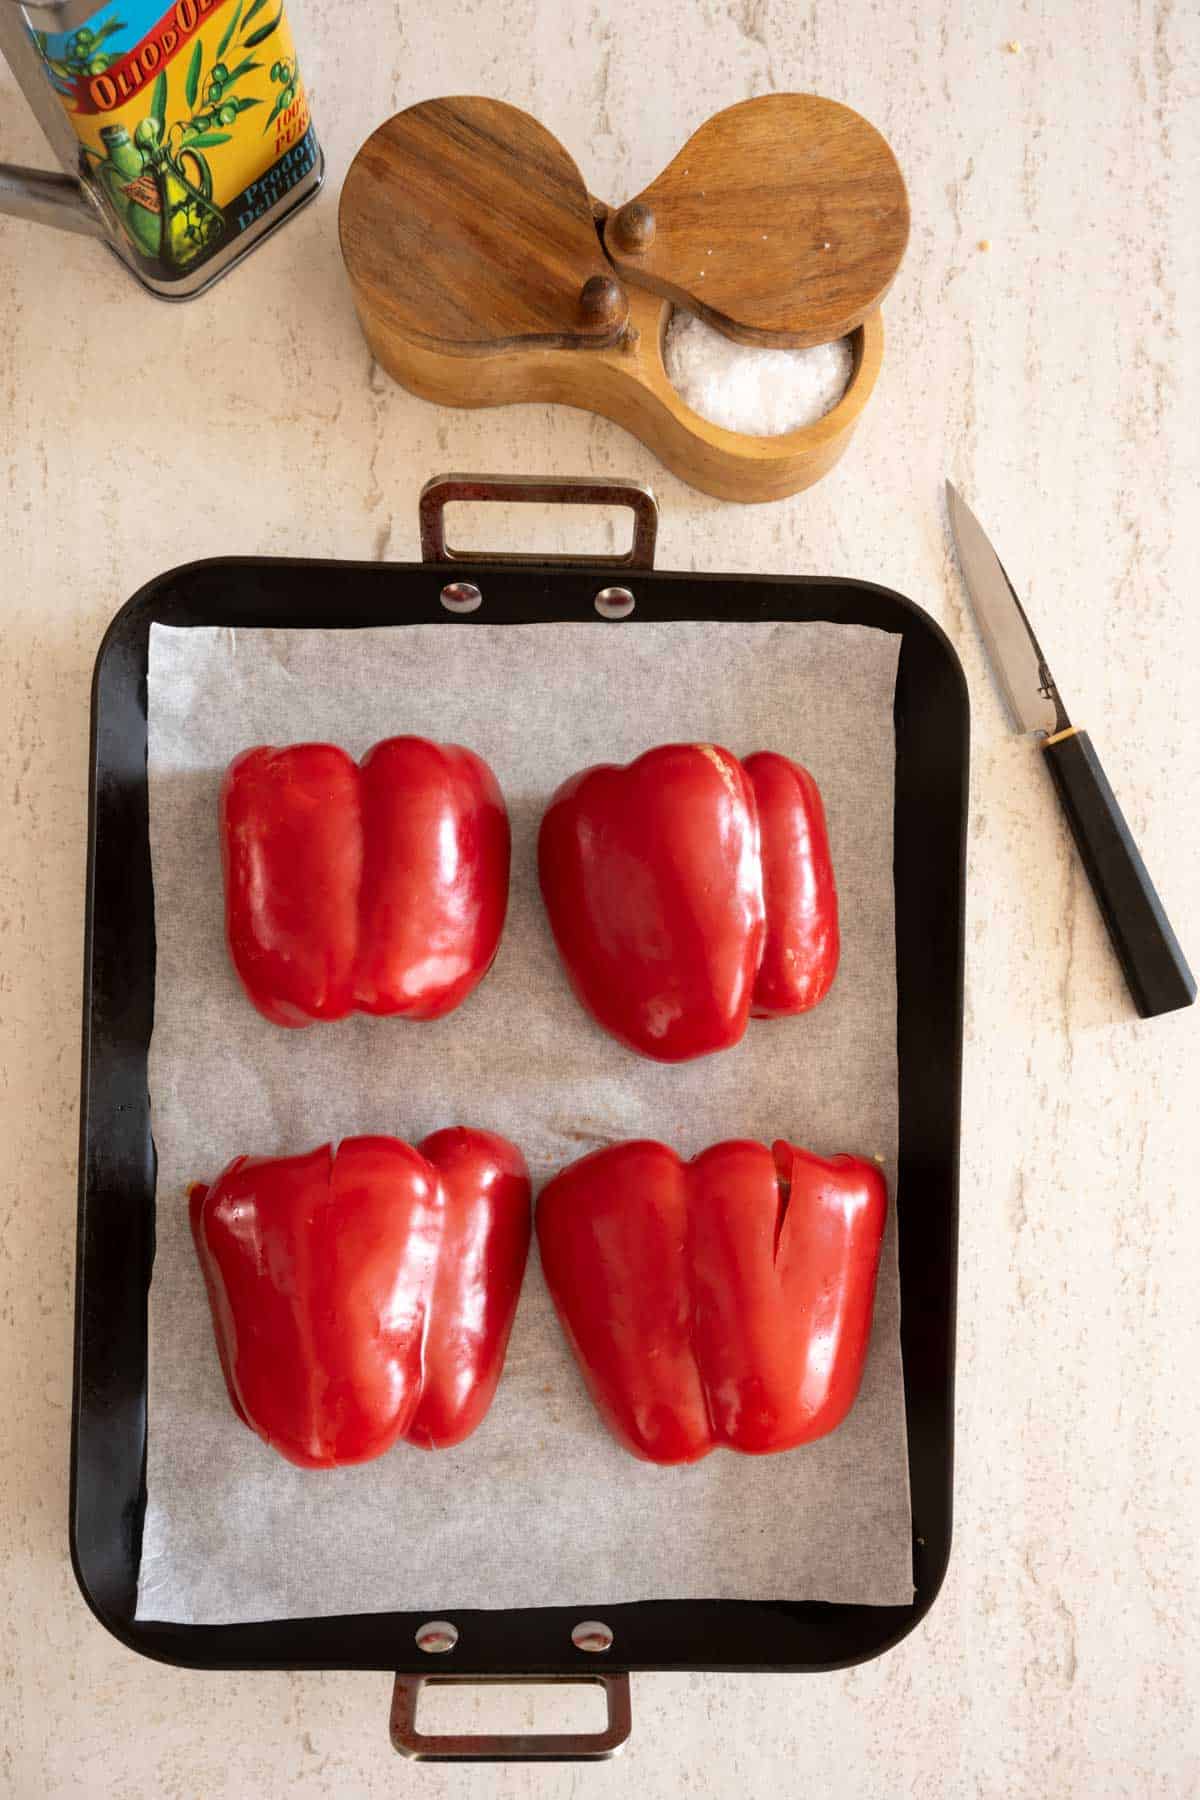 Four red bell peppers cut in half on a parchment-lined baking tray.